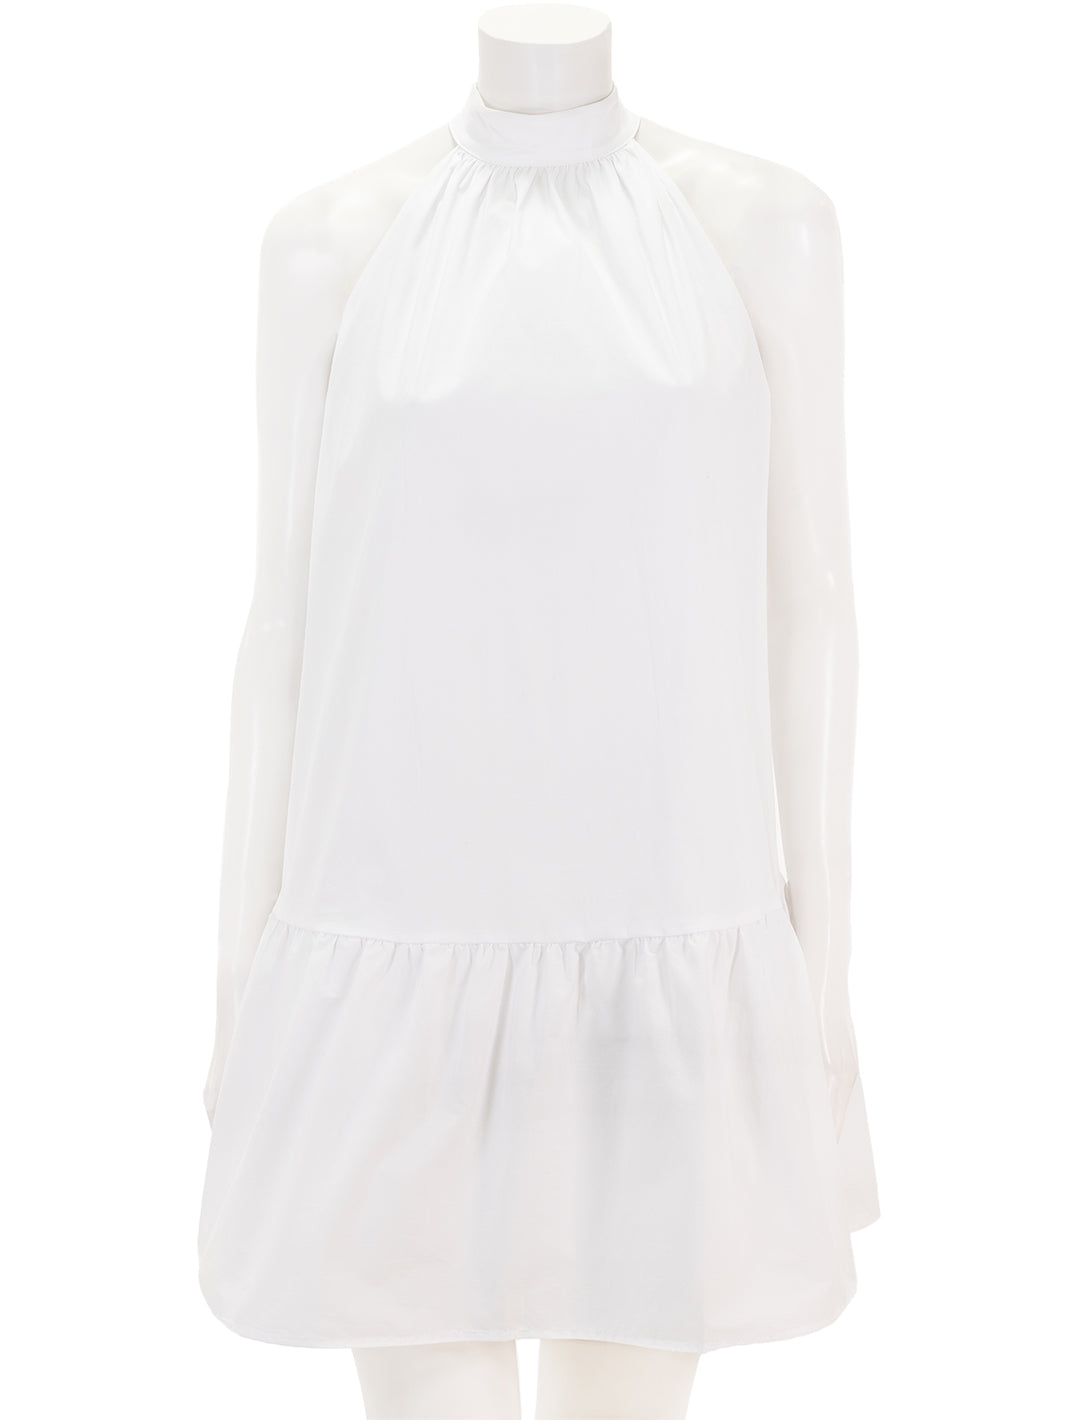 Front view of STAUD's marlowe dress in white.